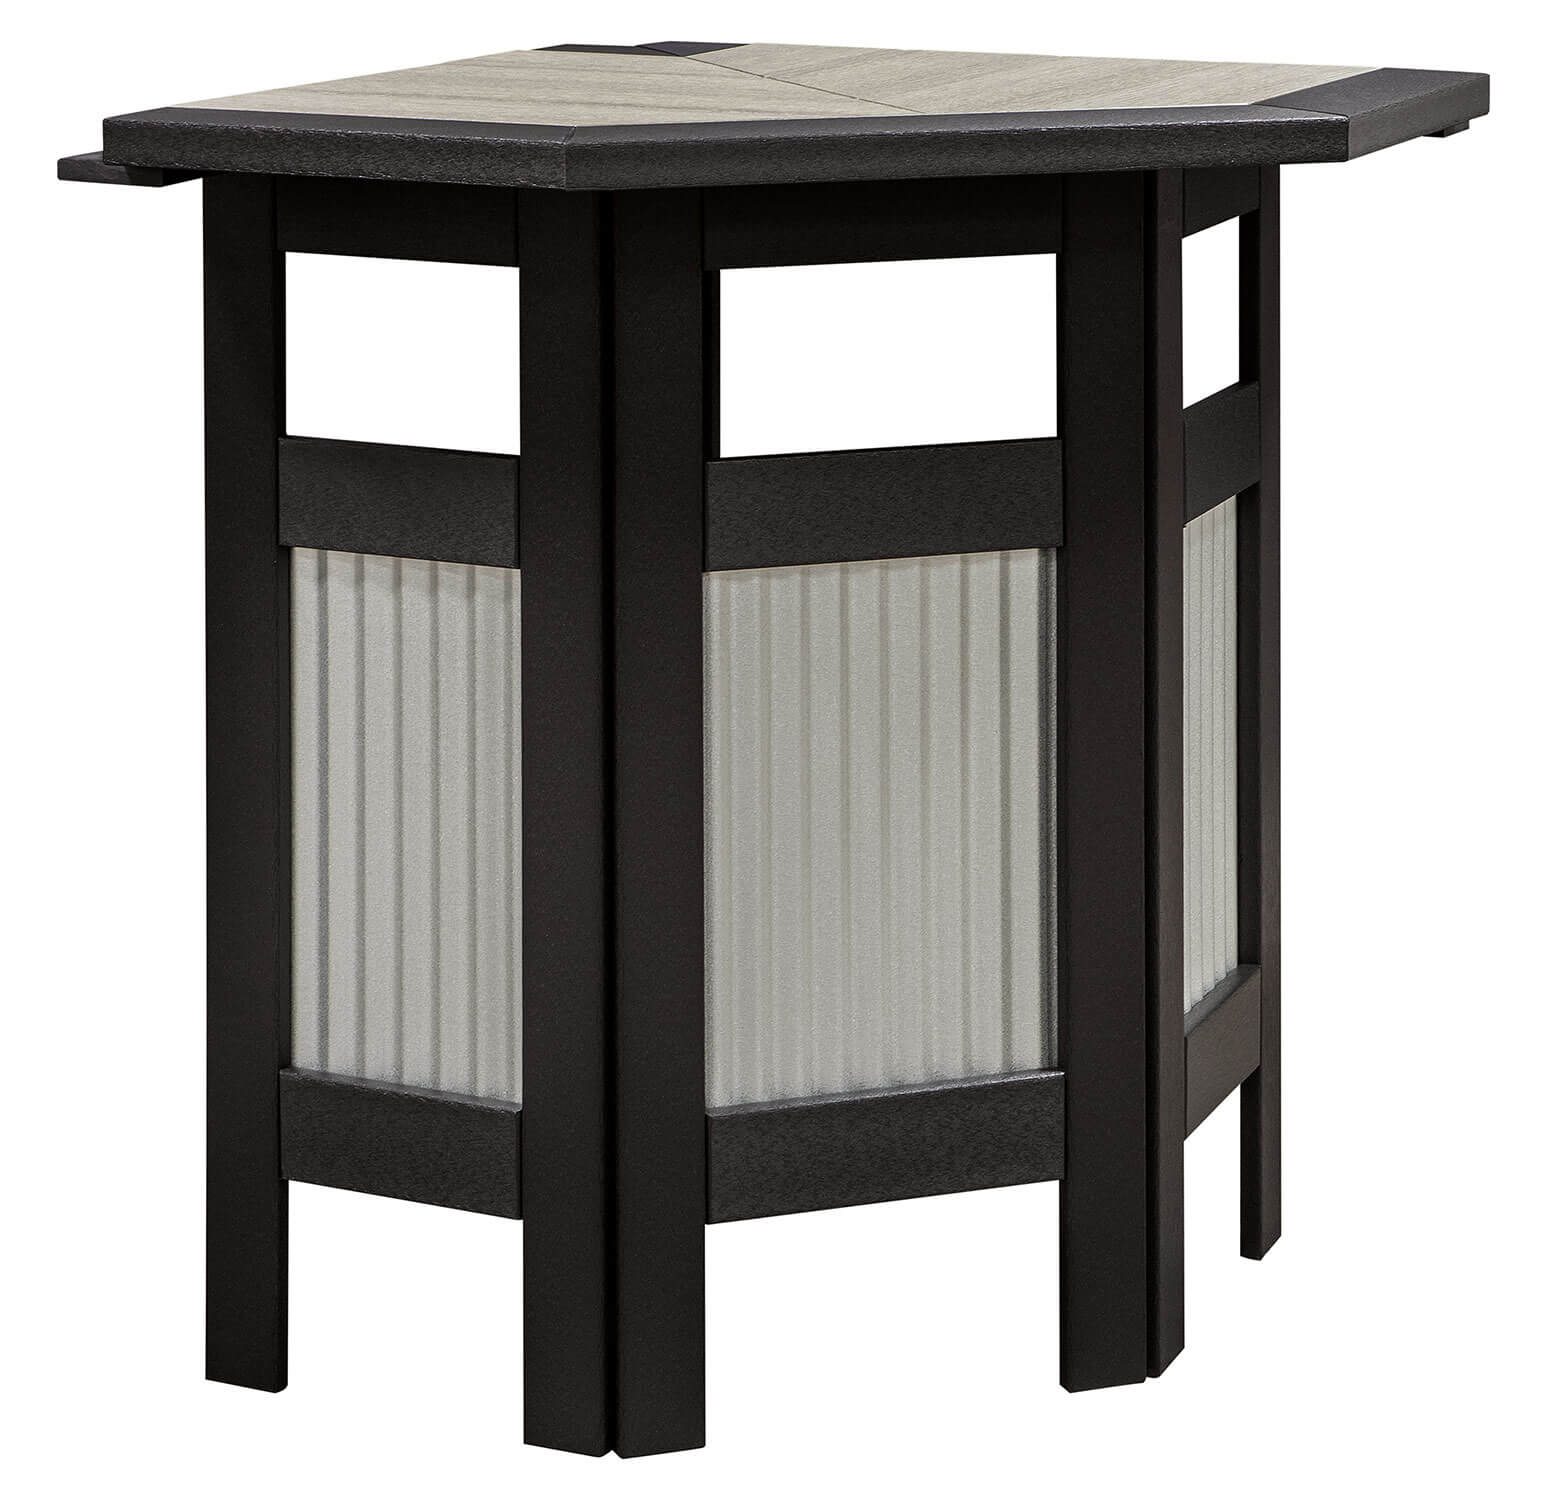 EC Woods Tacoma Outdoor Poly Bar Inside and Outside Corner Table